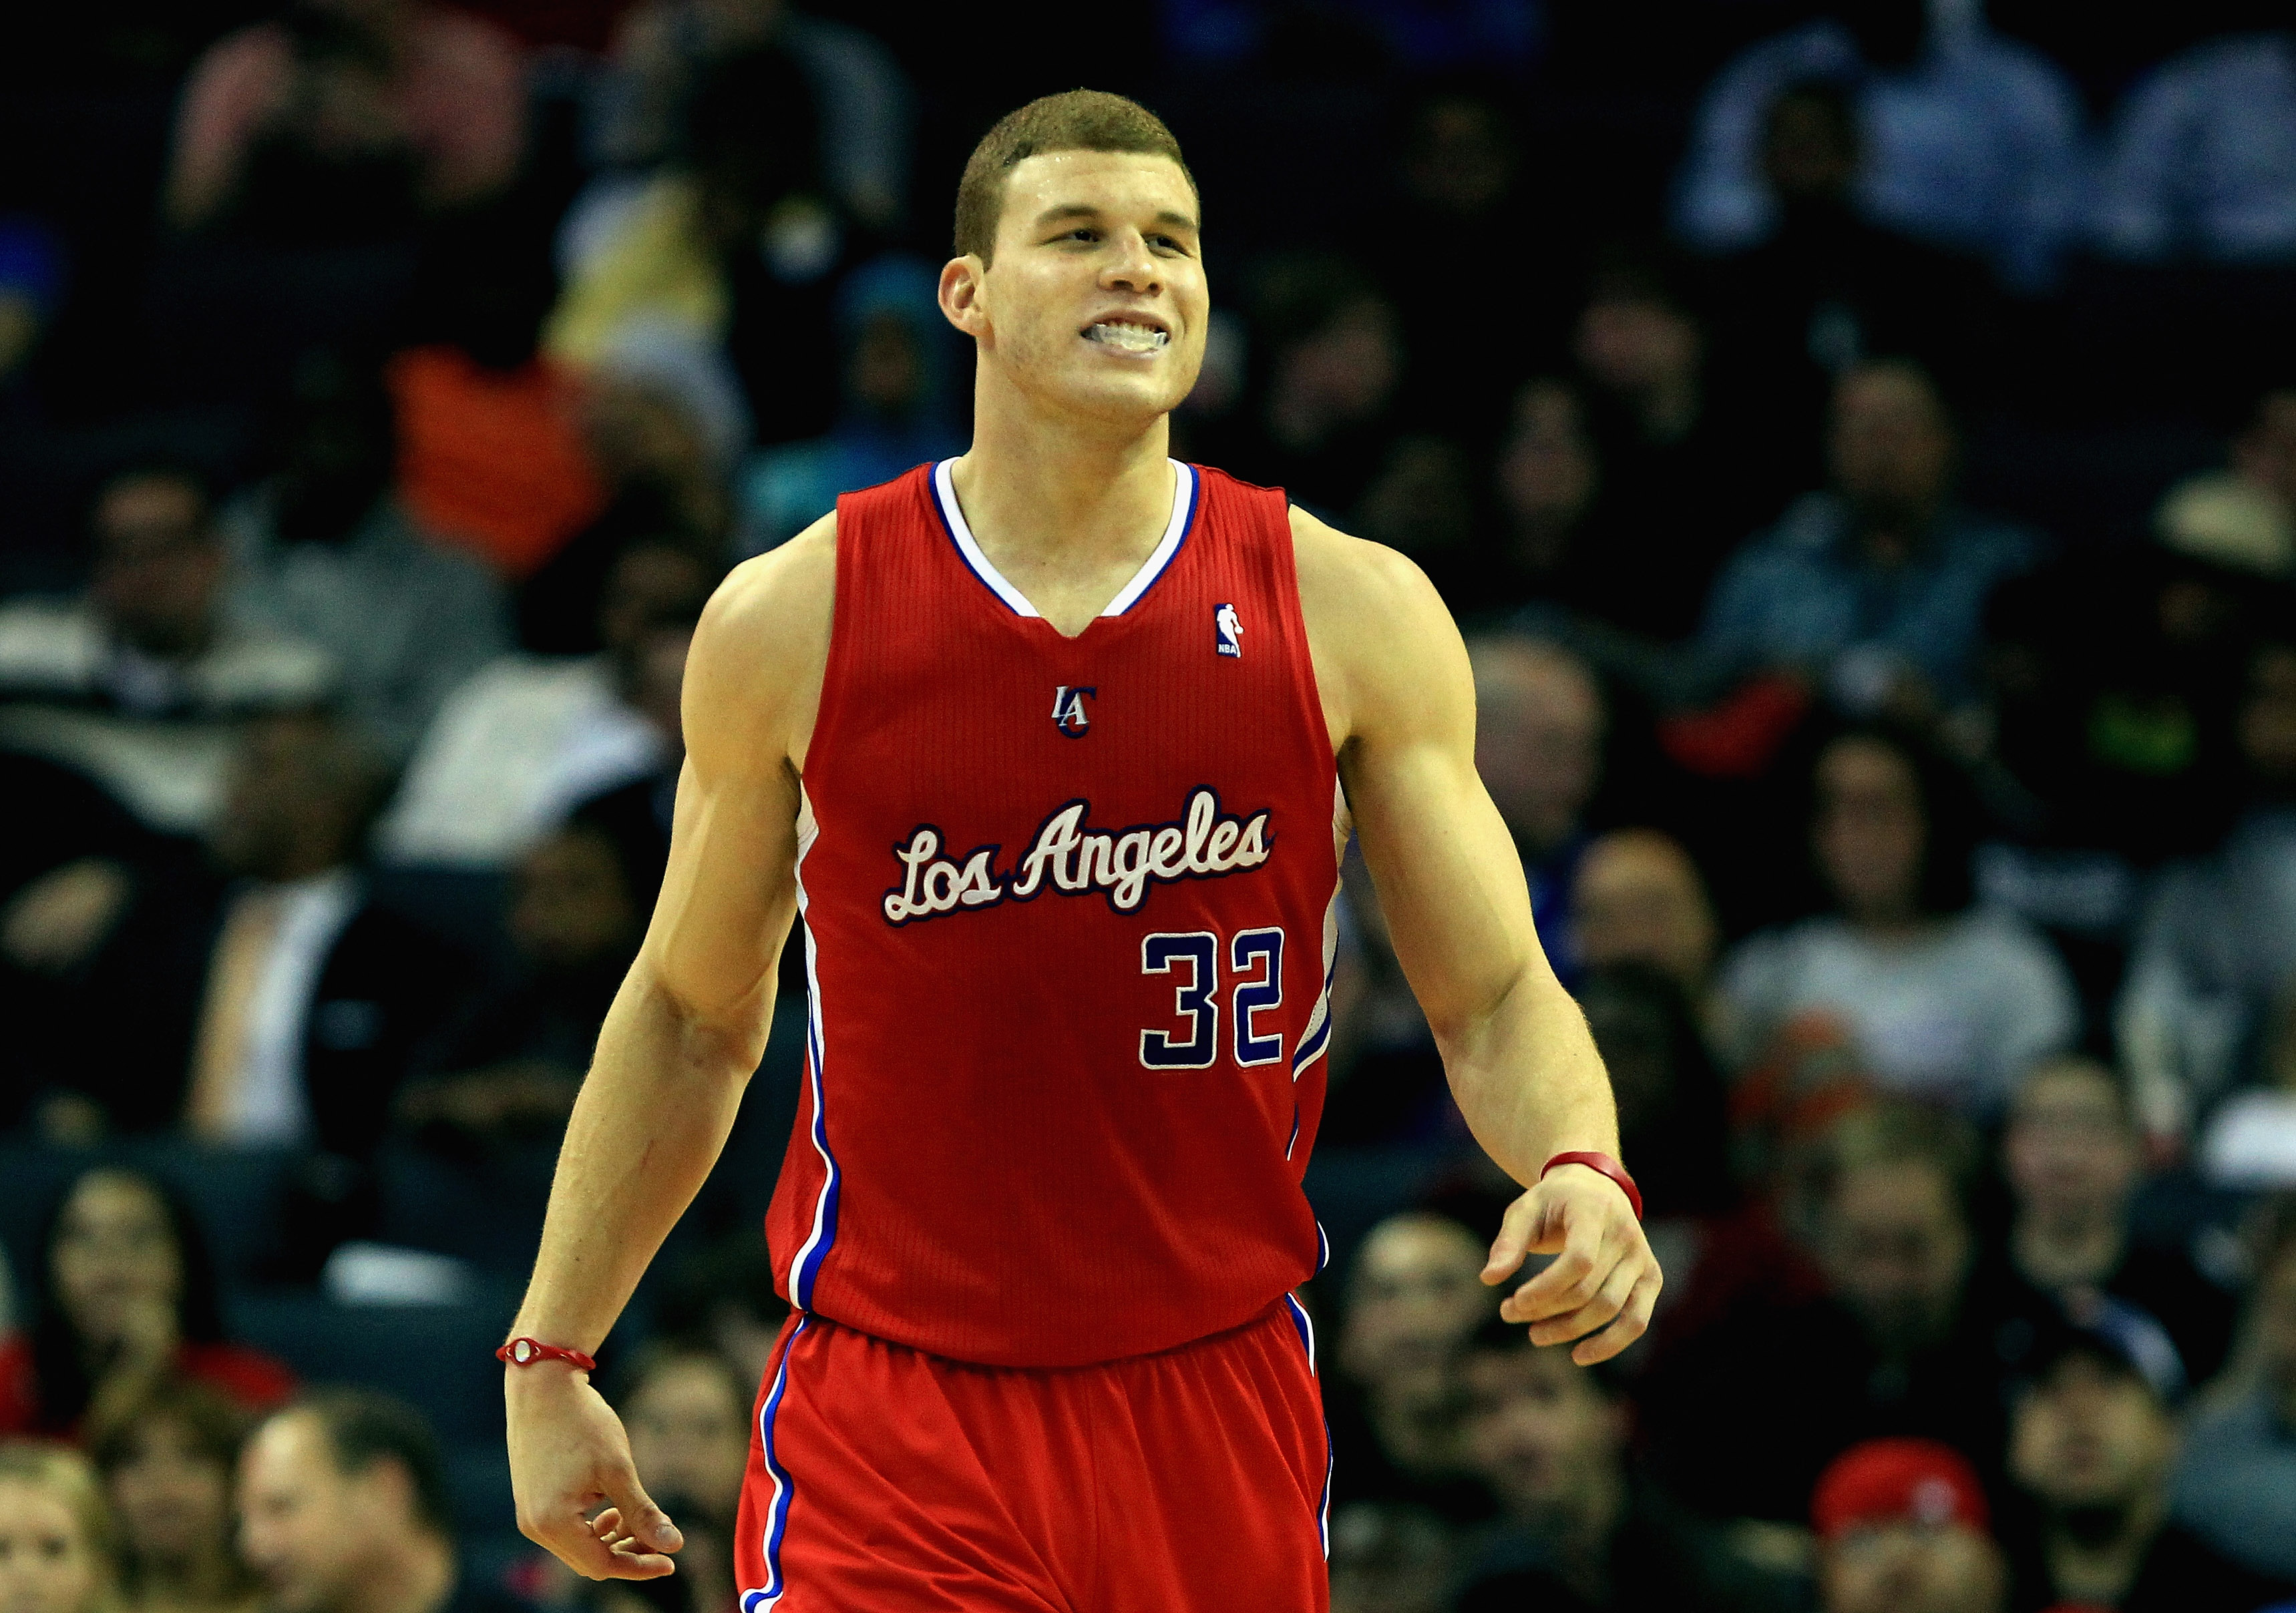 Blake Griffin Los Angeles Clippers Jerseys, Blake Griffin Shirt